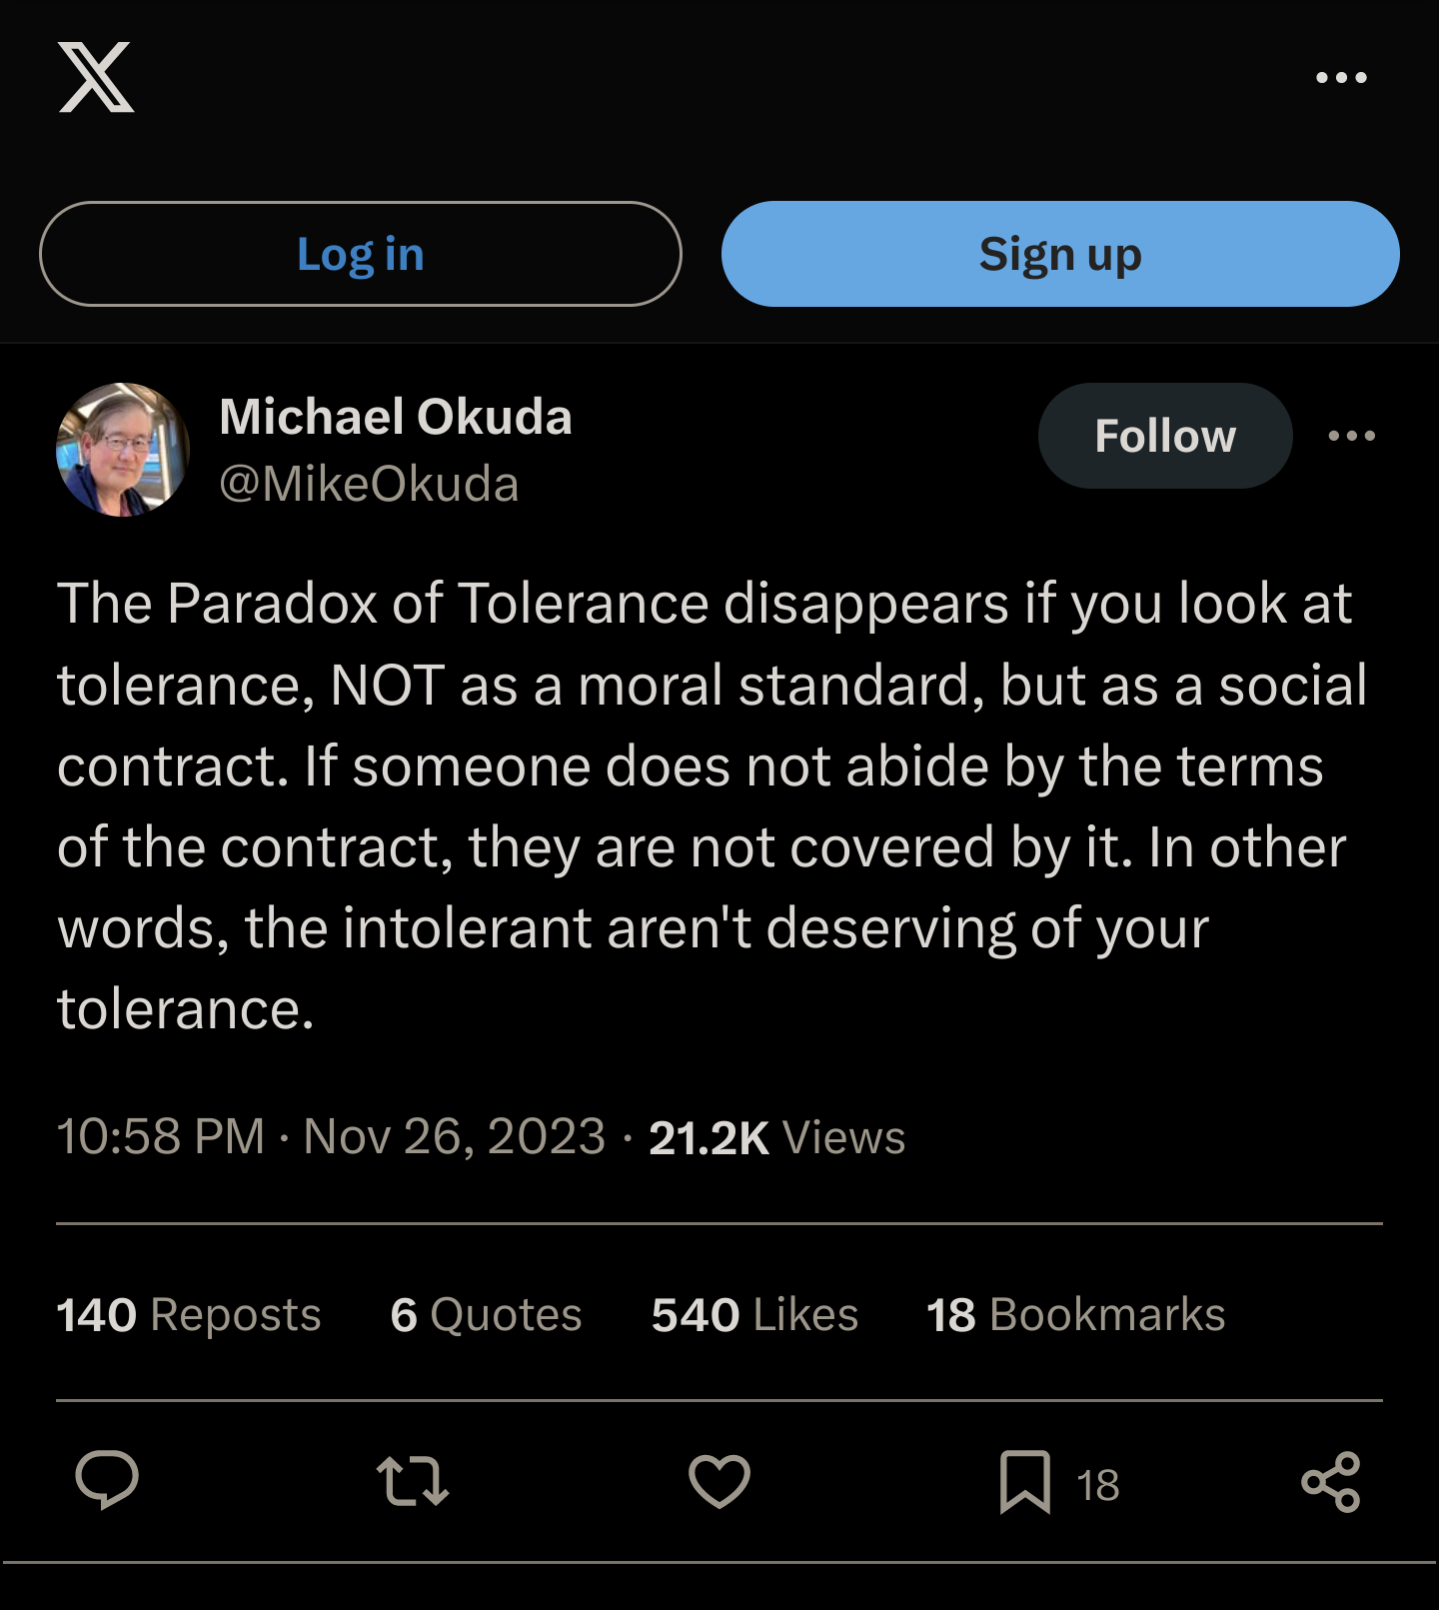 The Paradox of Tolerance disappears if you look at tolerance, NOT as a moral standard, but as a social contract. If someone does not abide by the terms of the contract, they are not covered by it. In other words, the intolerant aren't deserving of your tolerance.